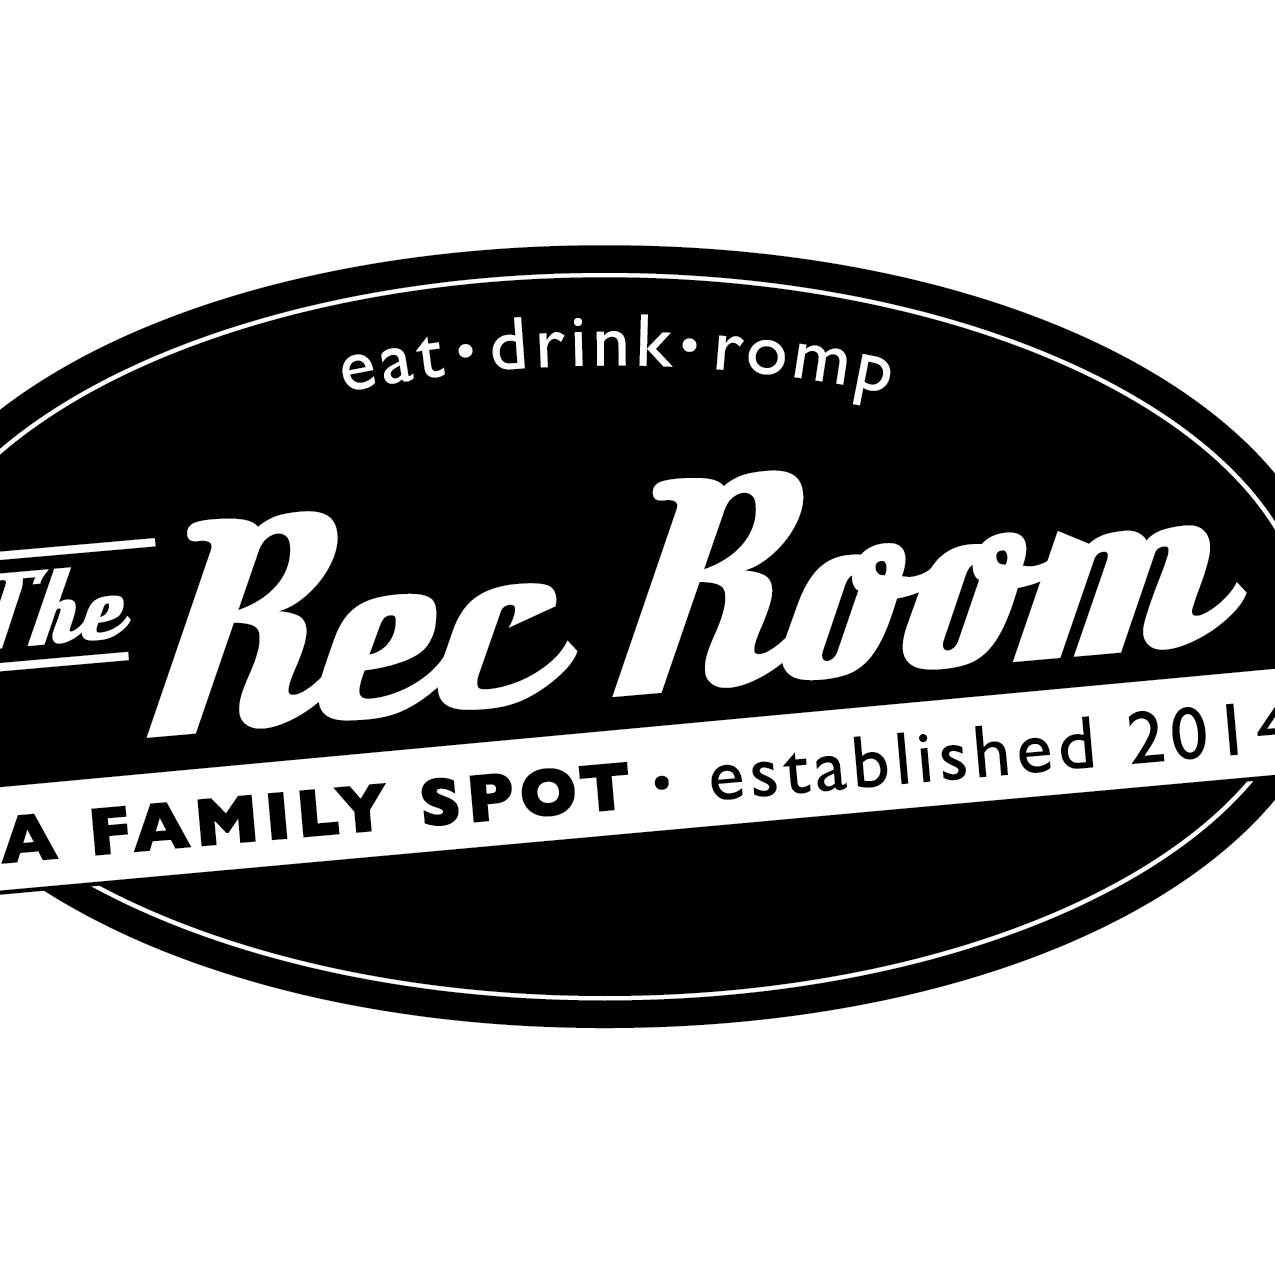 The Rec Room is the family friendly spot you've been looking for. Kick back and relax or plug in and work while the kiddos learn & play!